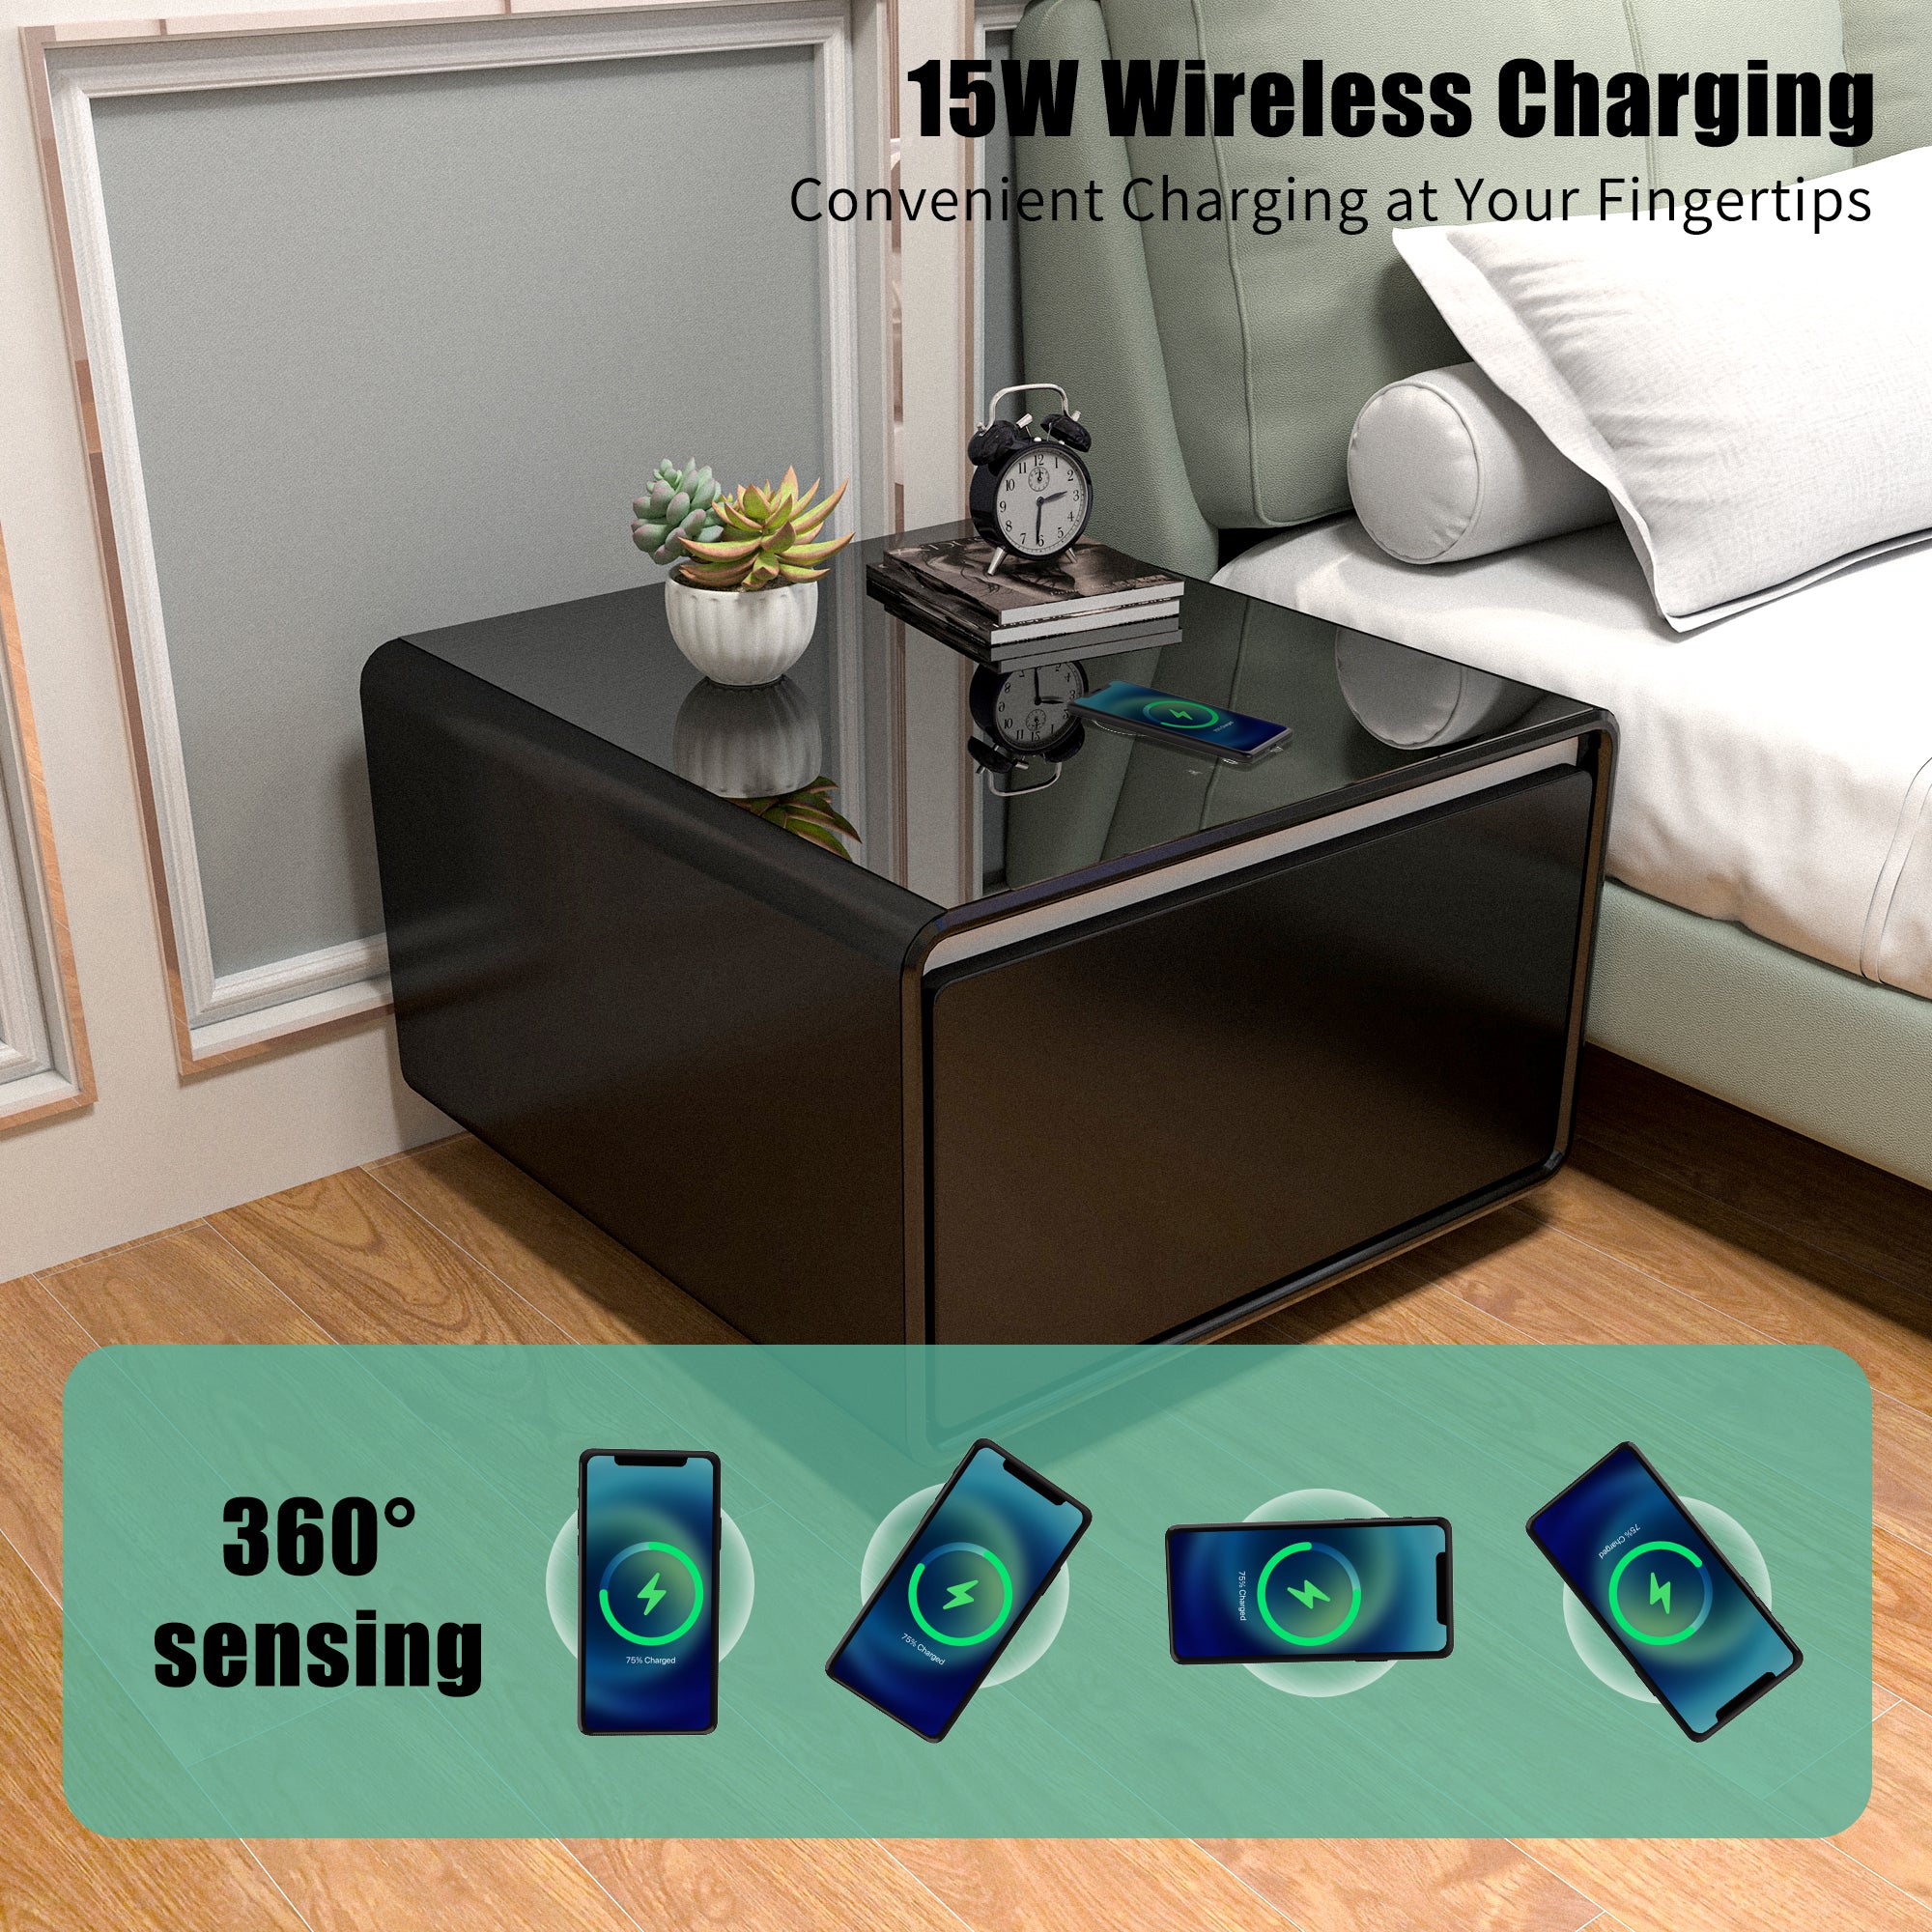 Bellemave Modern Smart Side Table with Built-in Fridge, Wireless Charging, Temperature Control, Power Socket, USB Interface, Outlet Protection, Induction Light